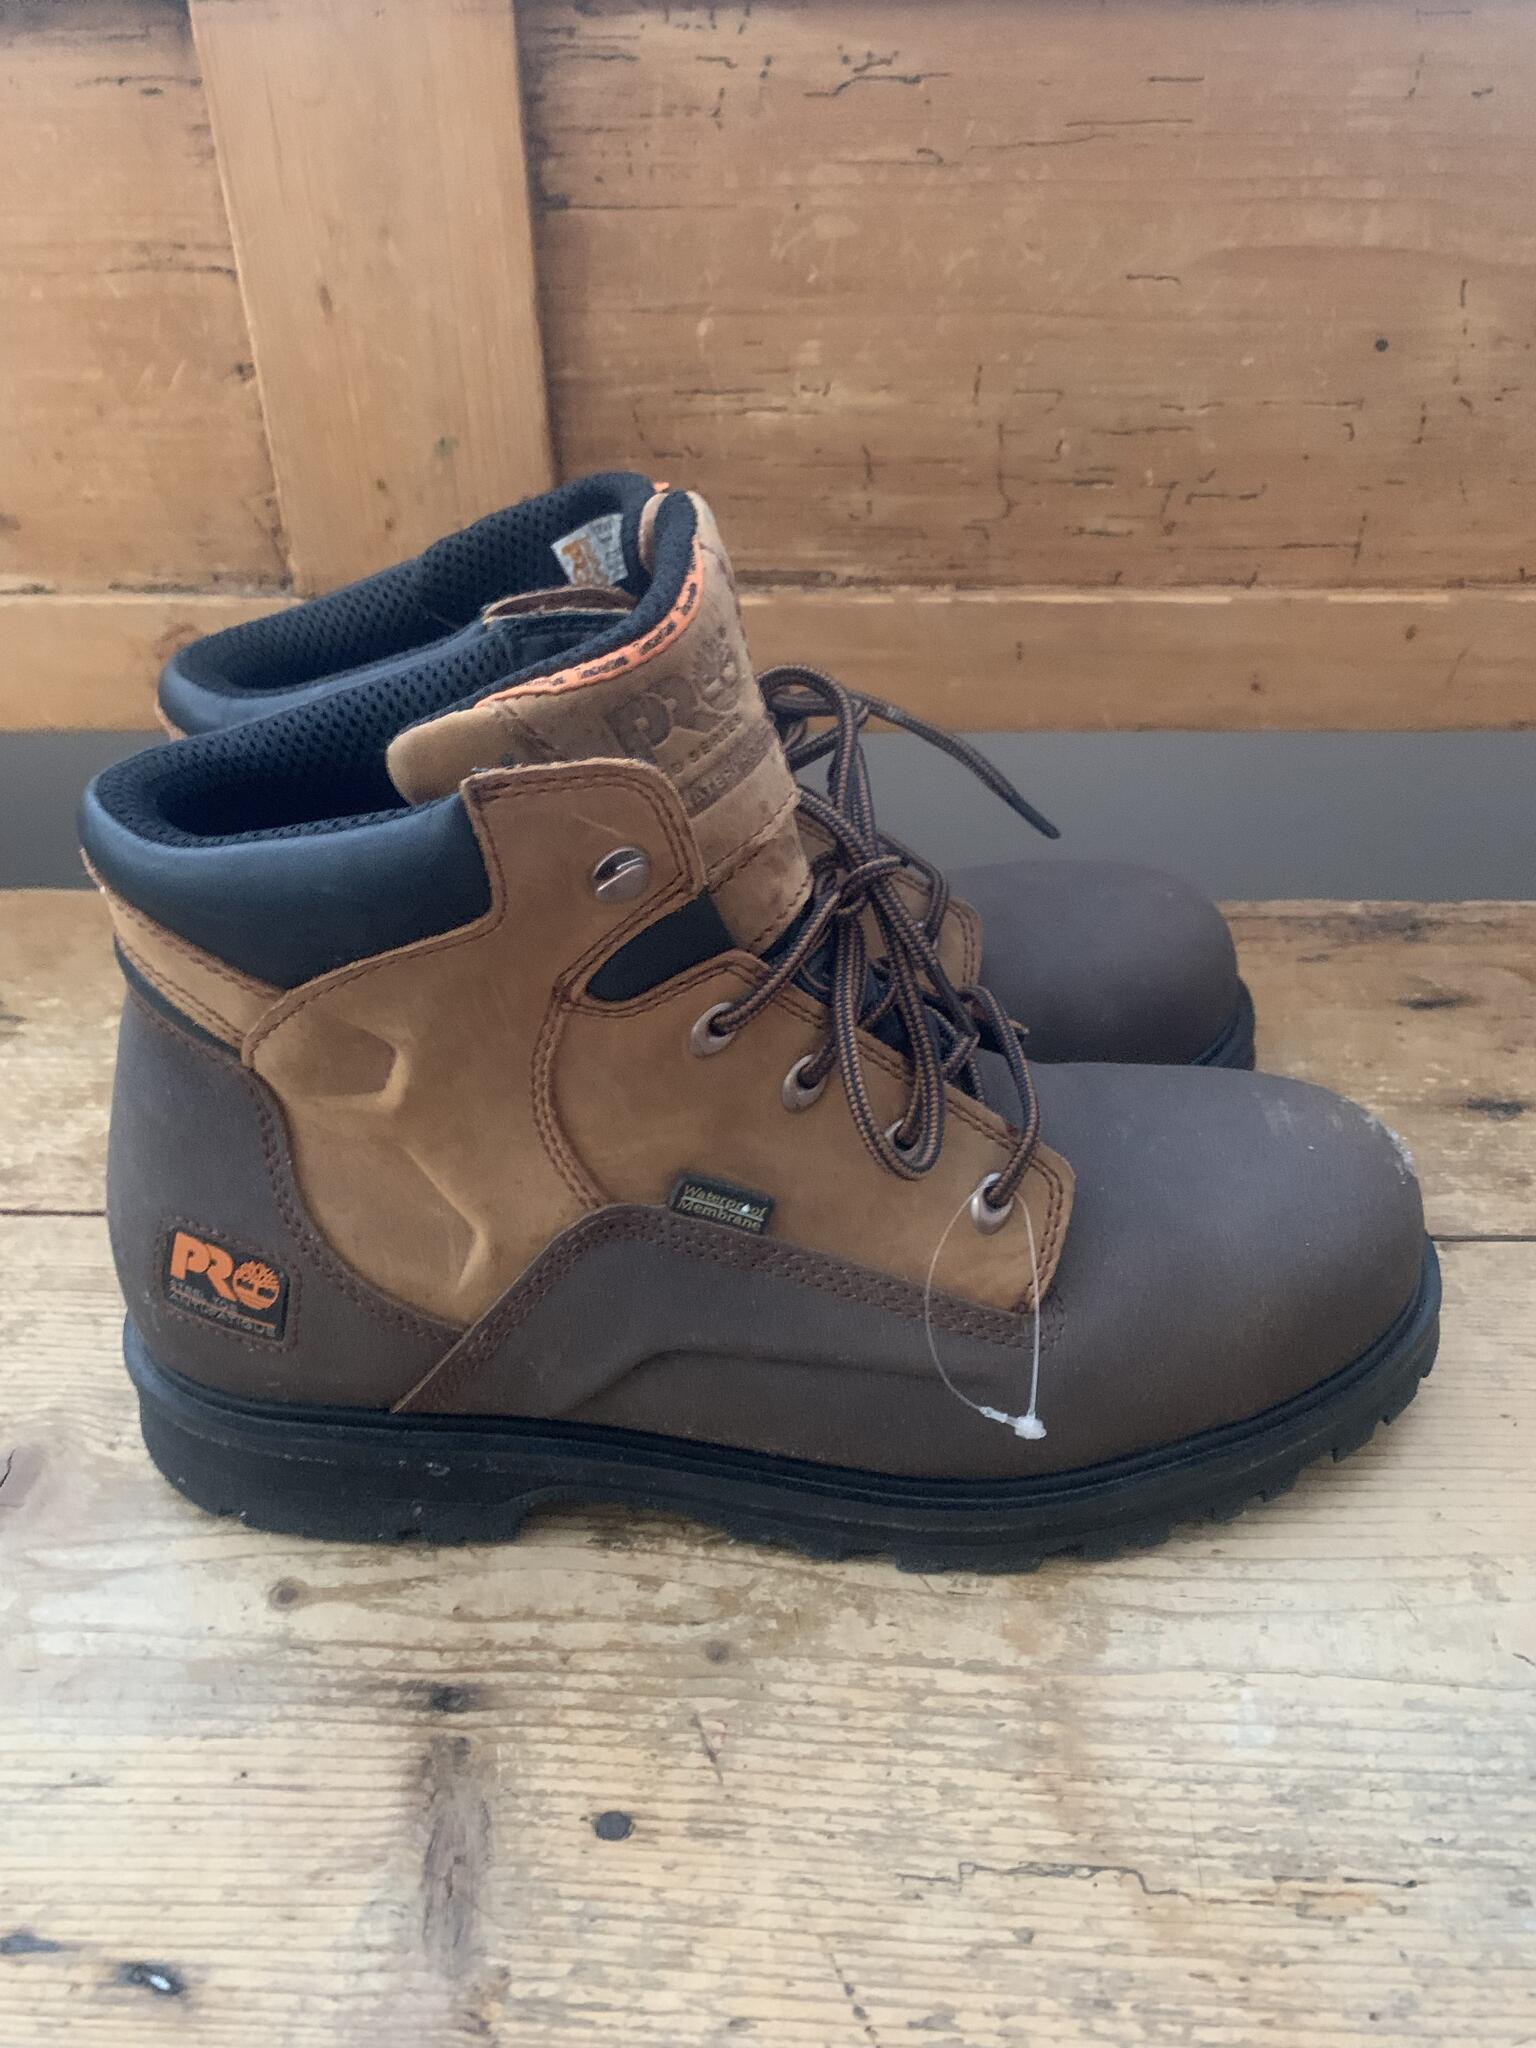 Size 12W Timberland Waterproof Oil Resistant Pro Series Boots Like New ...